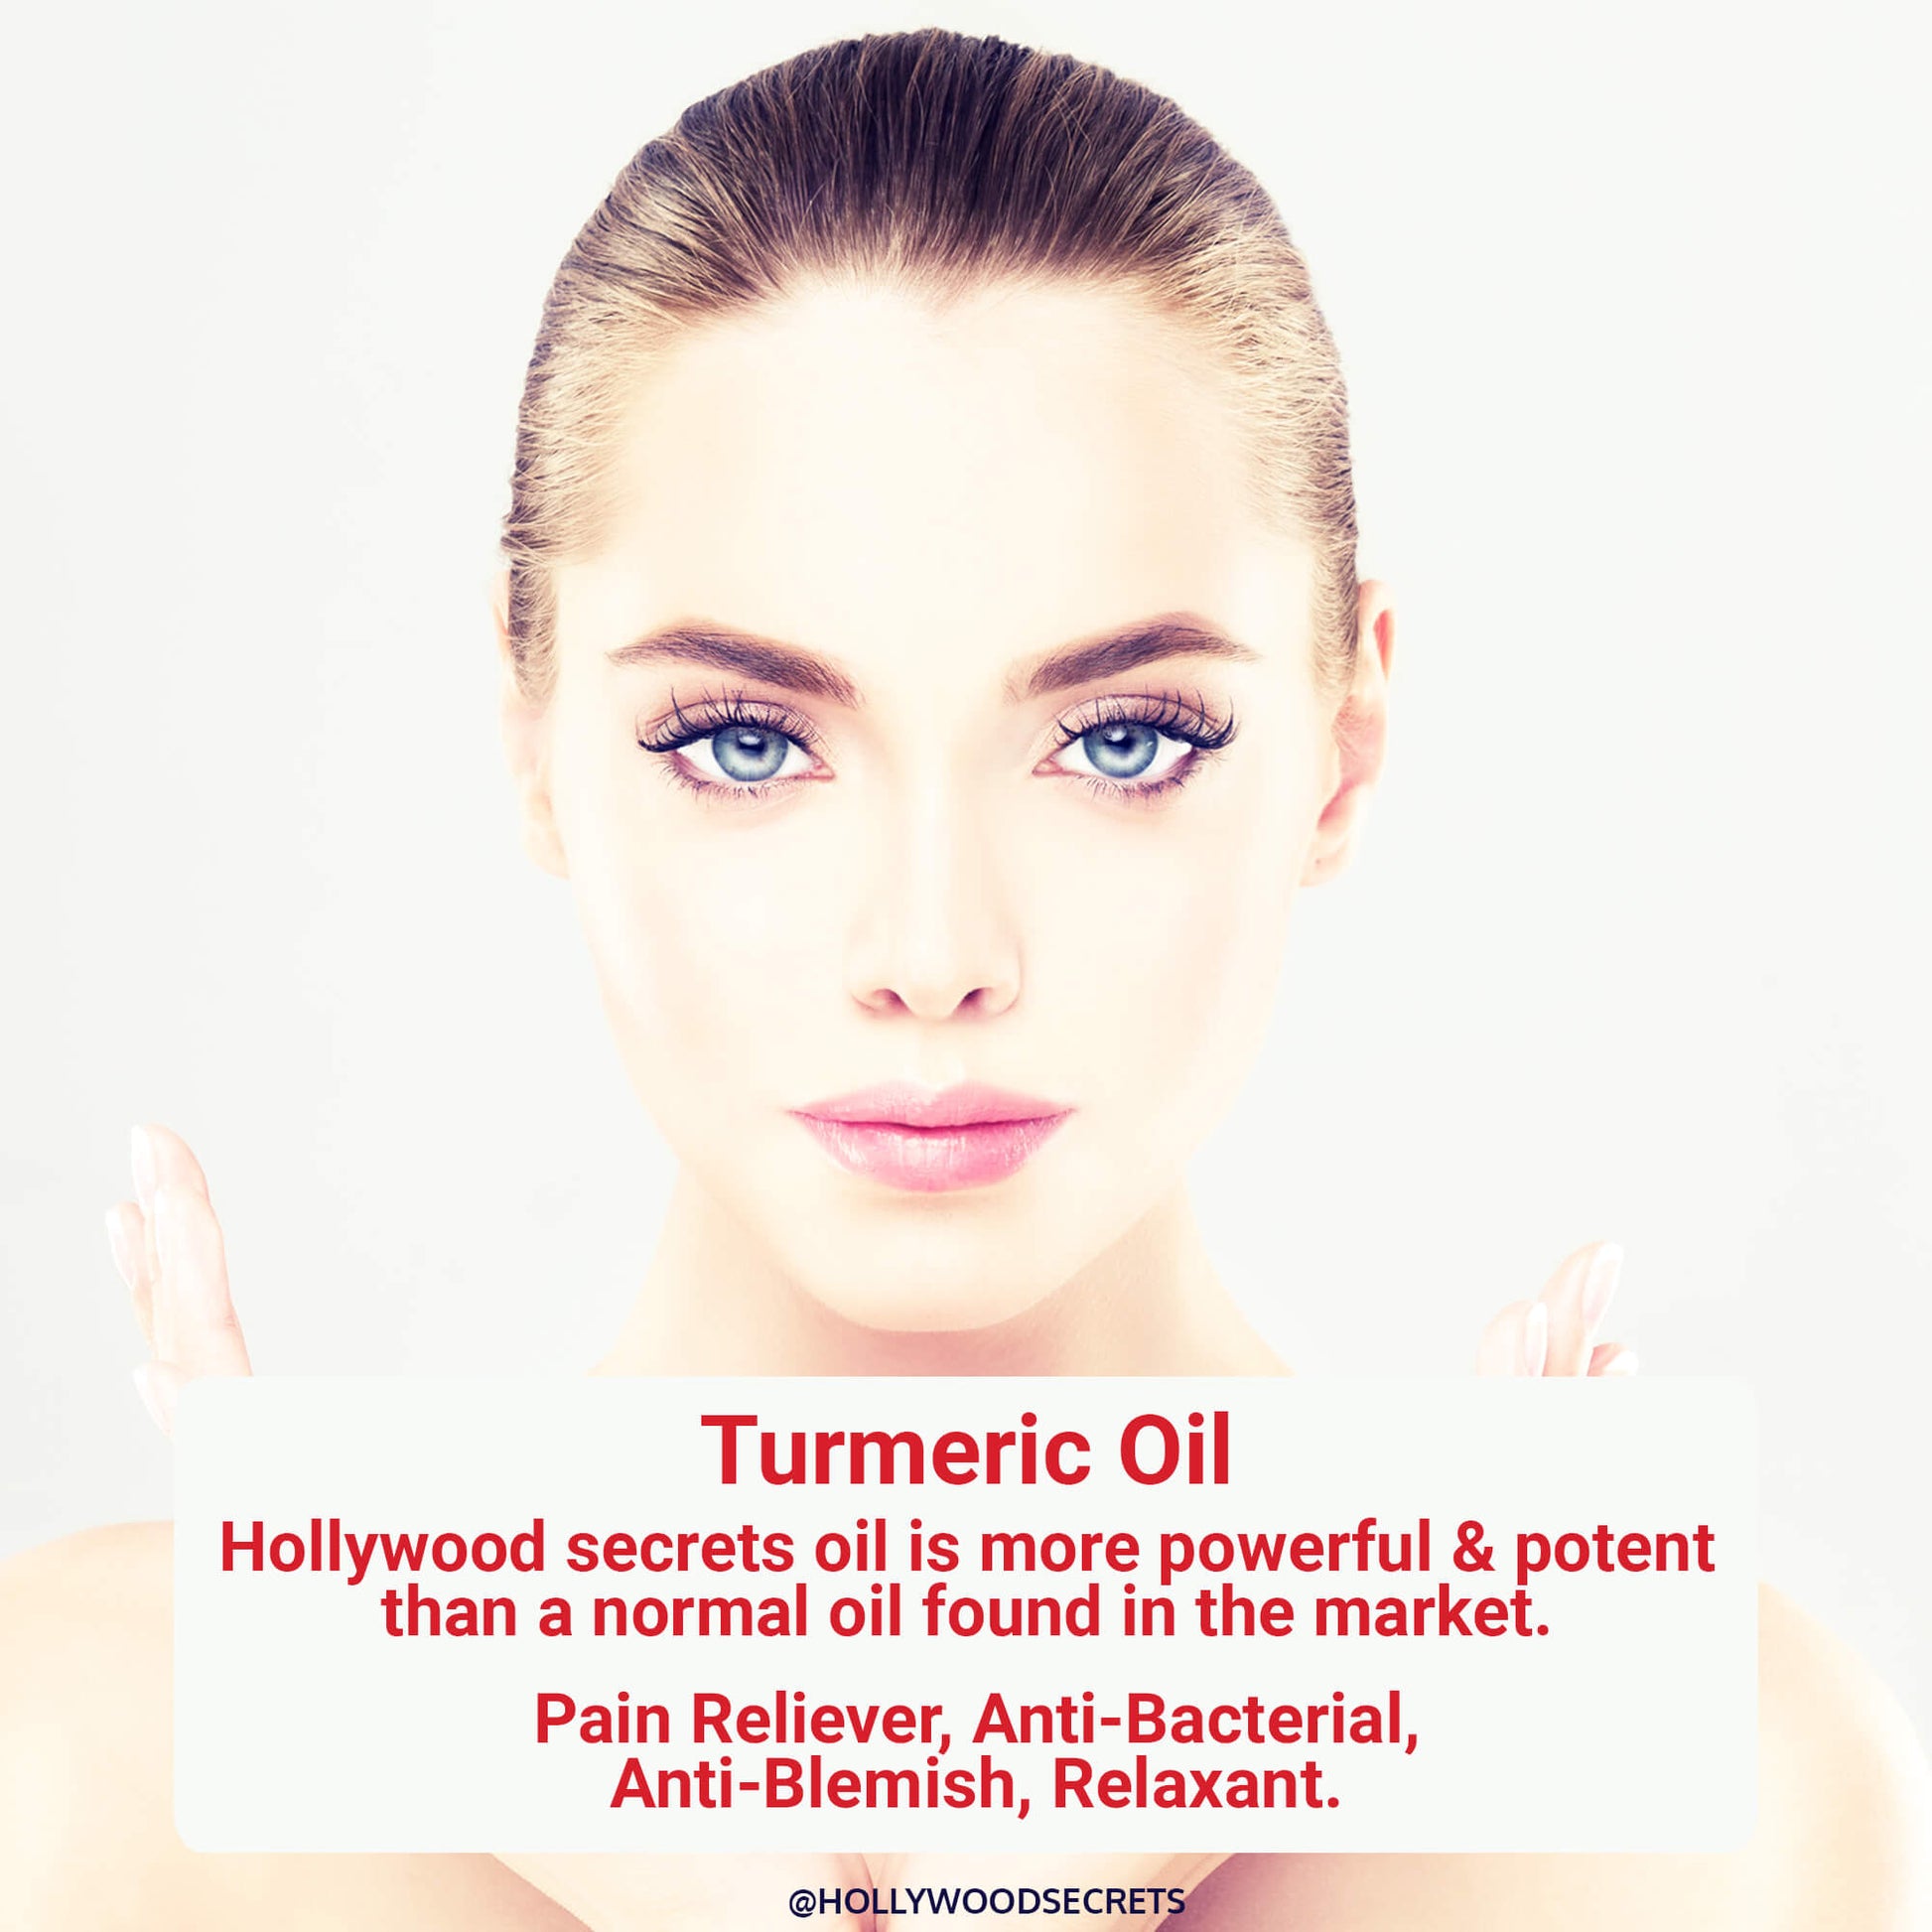 Turmeric Oil Pure Cold Pressed 100ml Hollywood Secrets